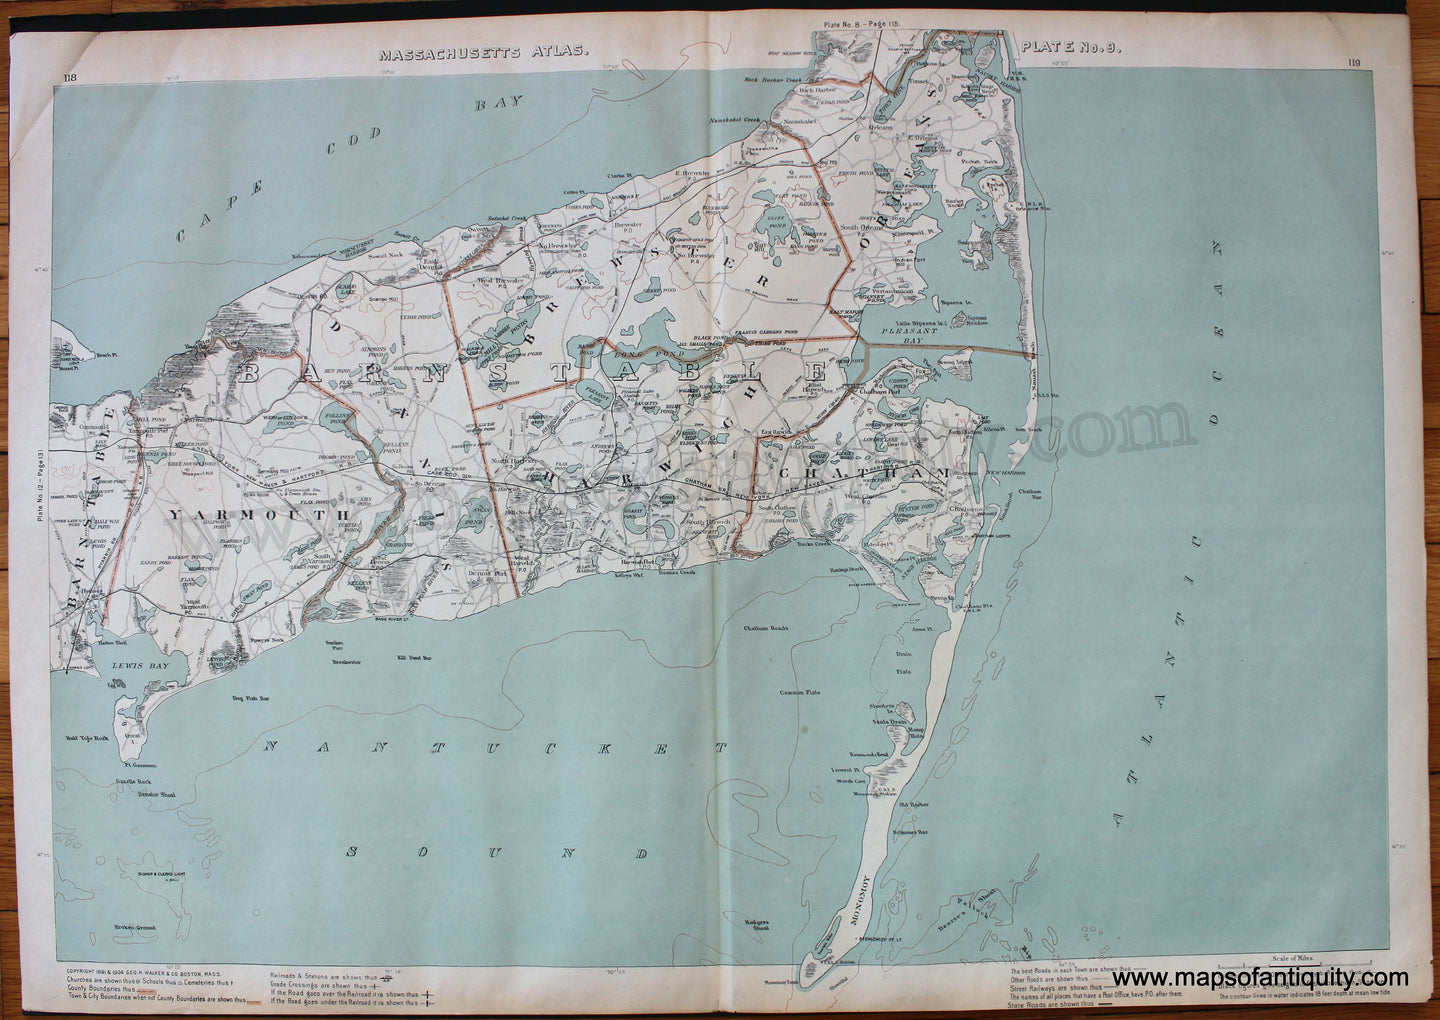 Antique-Printed-Color-Map-Yarmouth-Dennis-Brewster-Orleans-Harwich-Chatham-(MA)--1904-G.-H.-Walker-Cape-Cod-and-Islands-Cape-and-Islands-General-1900s-20th-century-Maps-of-Antiquity